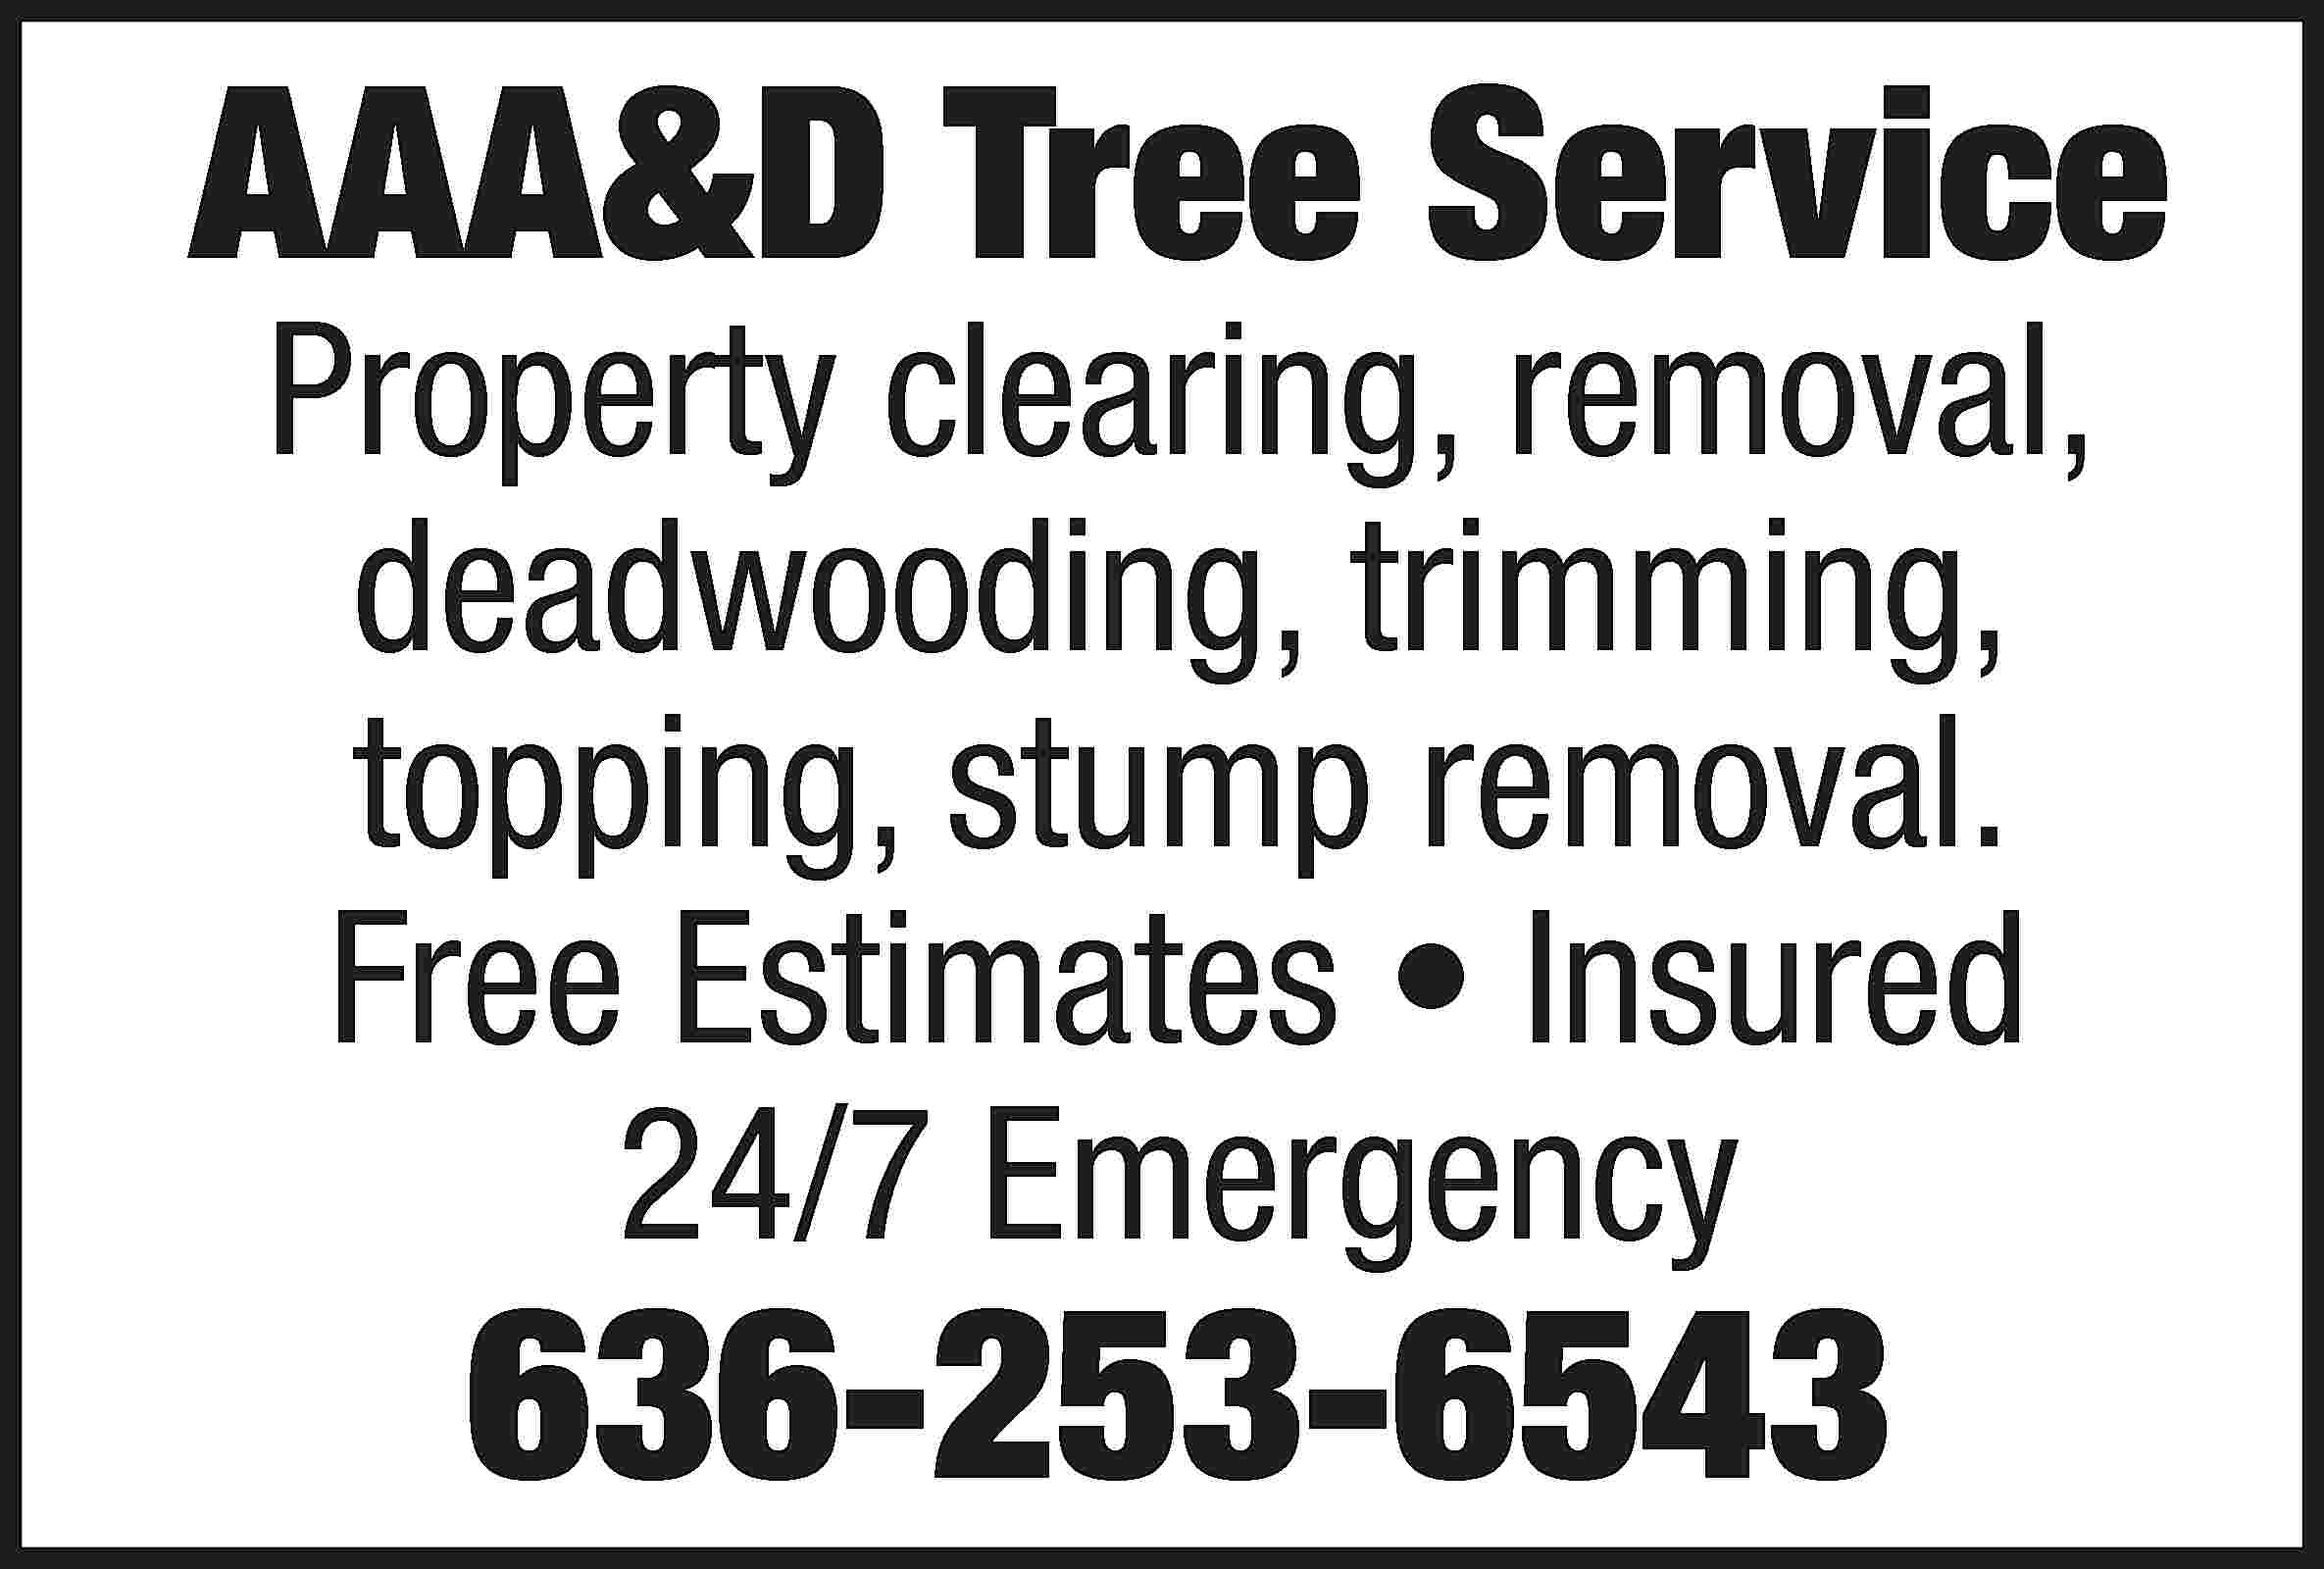 AAA&D Tree Service Property clearing,  AAA&D Tree Service Property clearing, removal, deadwooding, trimming, topping, stump removal. Free Estimates • Insured 24/7 Emergency 636-253-6543